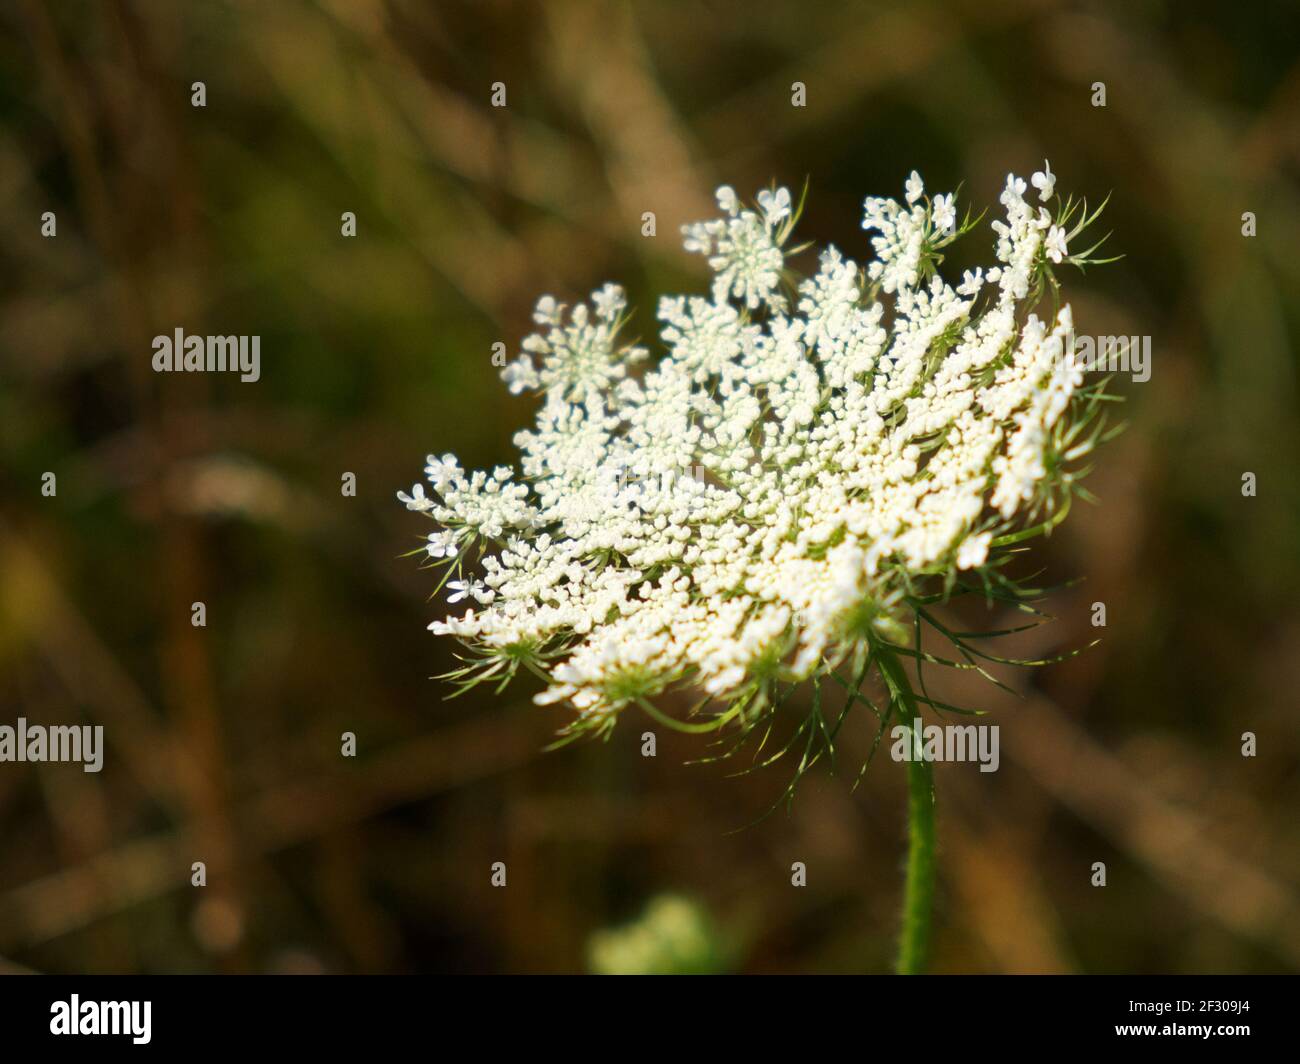 Hemlock. Herbaceous strong-smelling poisonous plant. Inflorescence of white flowers on a blurred background. Stock Photo